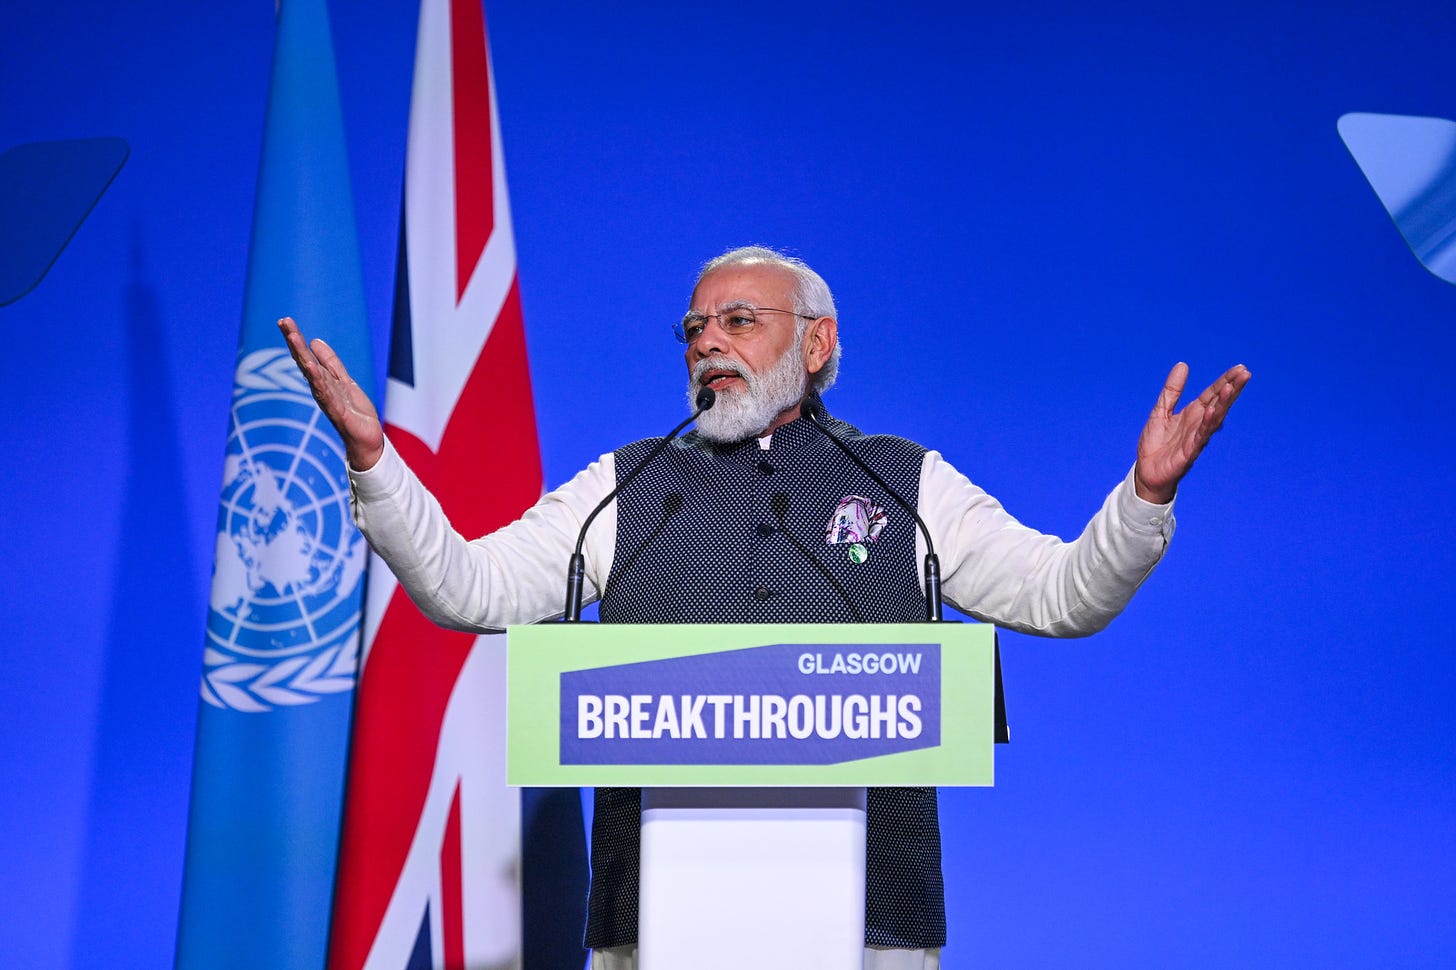 Indian Prime Minister Narendra Modi at COP26 summit in Glasgow on November 2, 2021 (Image: Karwai Tang/UK Government via COP26; CC BY-NC-ND 2.0)